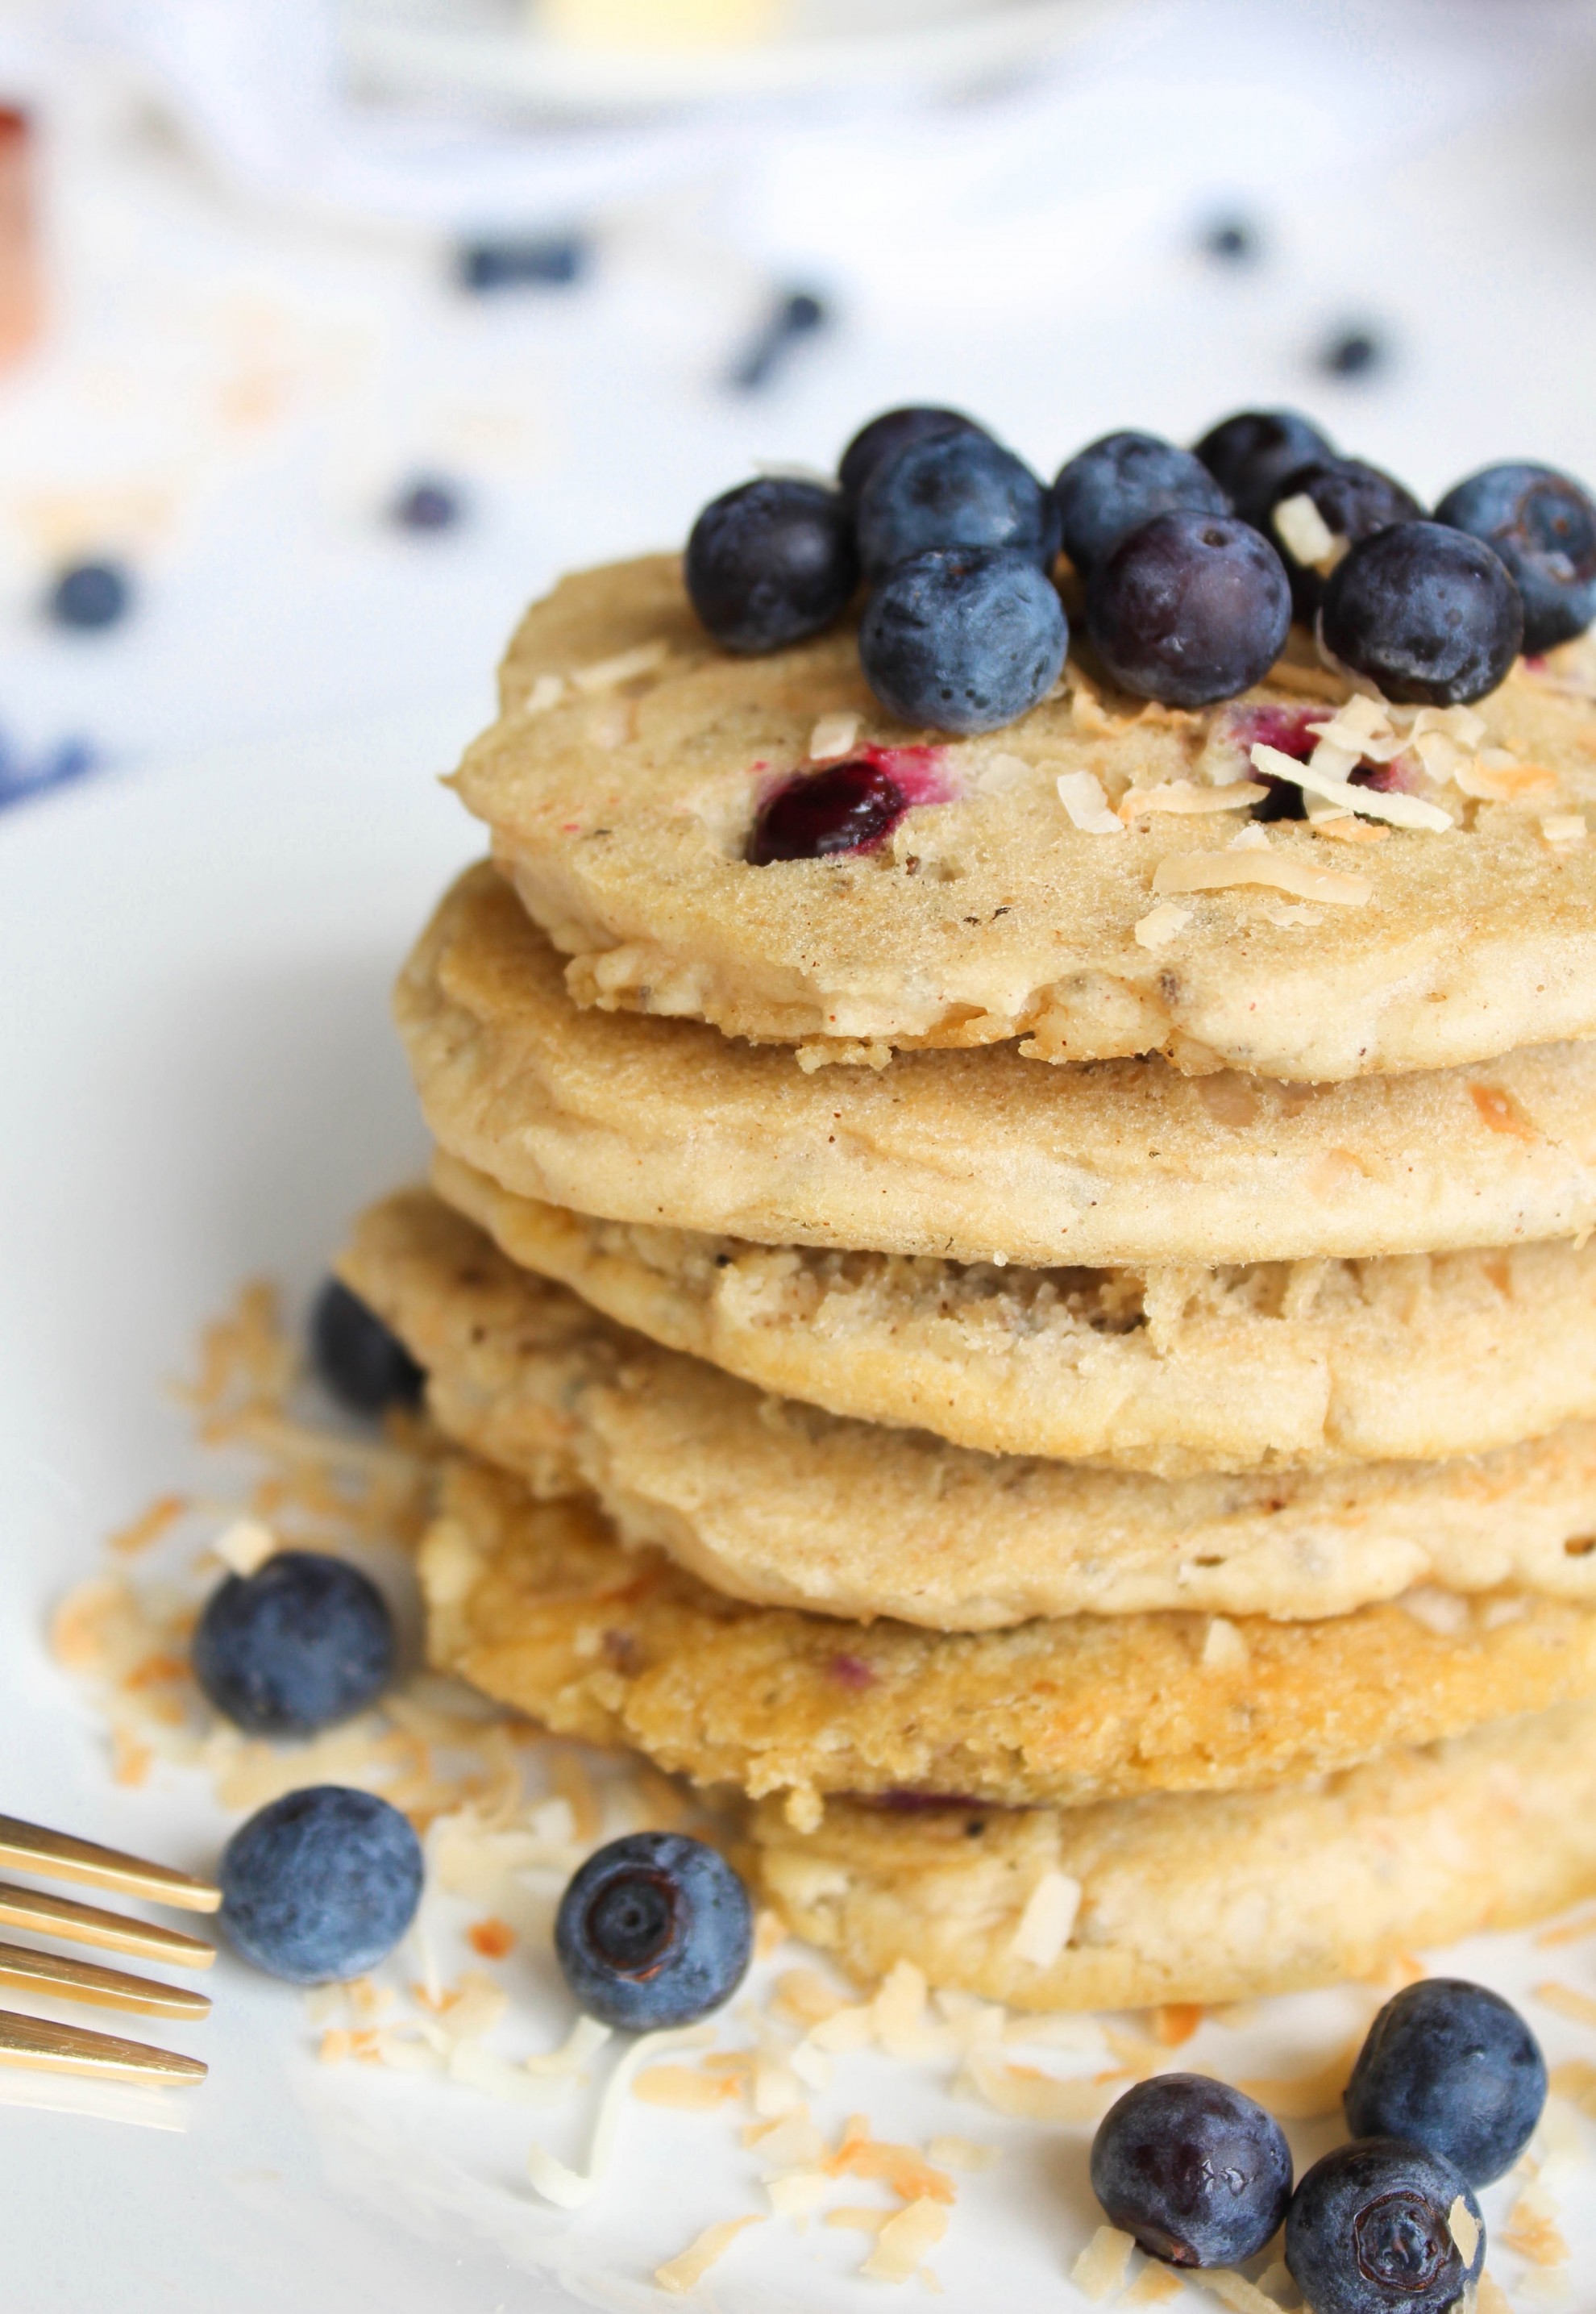 Toasted Coconut Blueberry Pancakes-made with brown rice flour